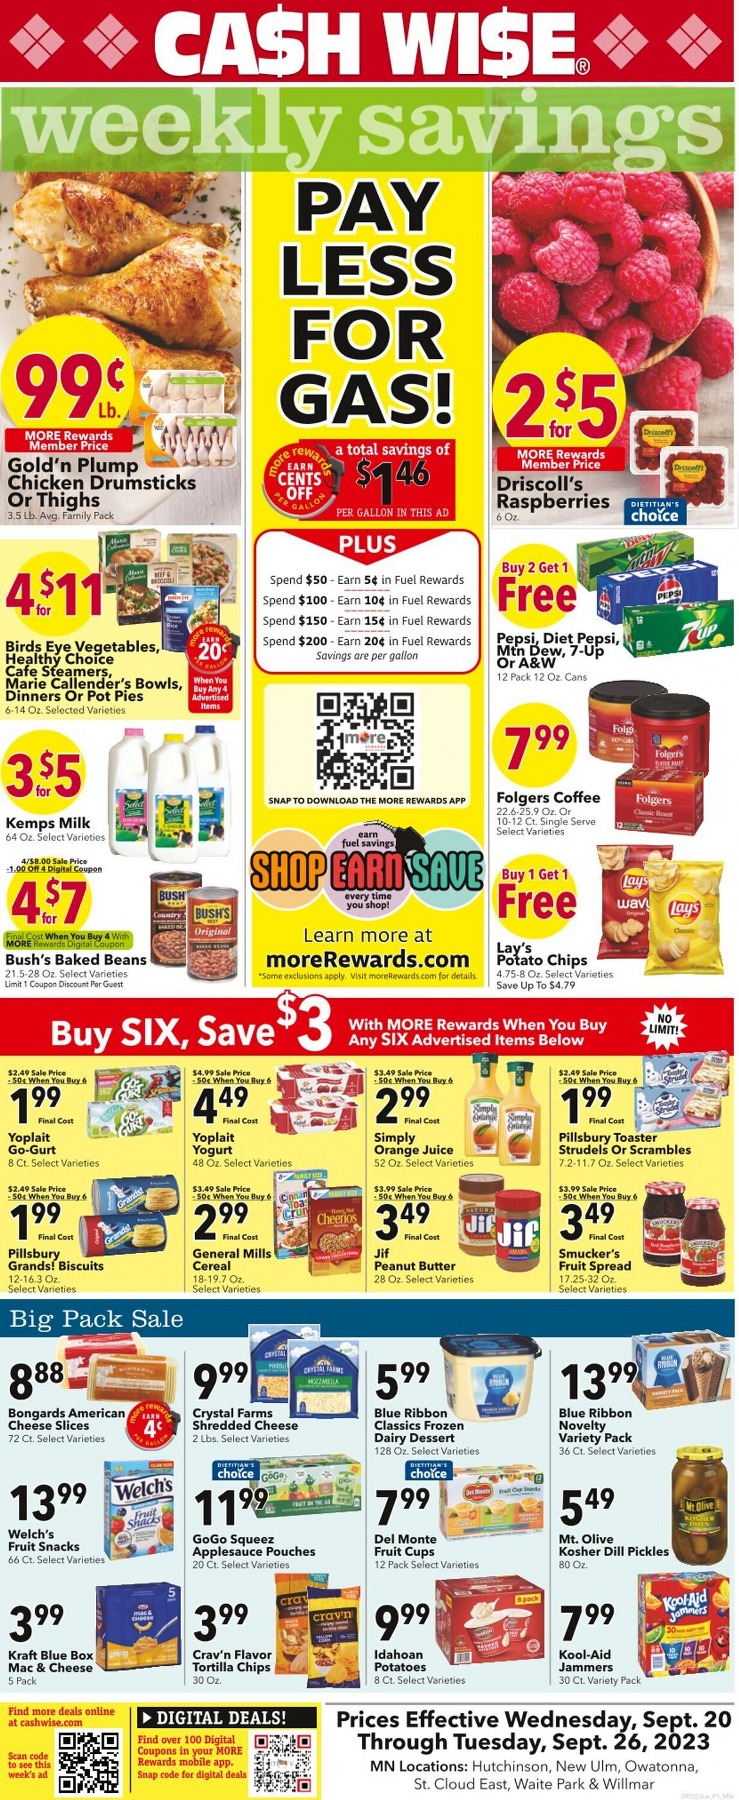 Cash Wise Weekly Ad May 25 to May 31, 2022 1 – cash wise ad oct 4 1